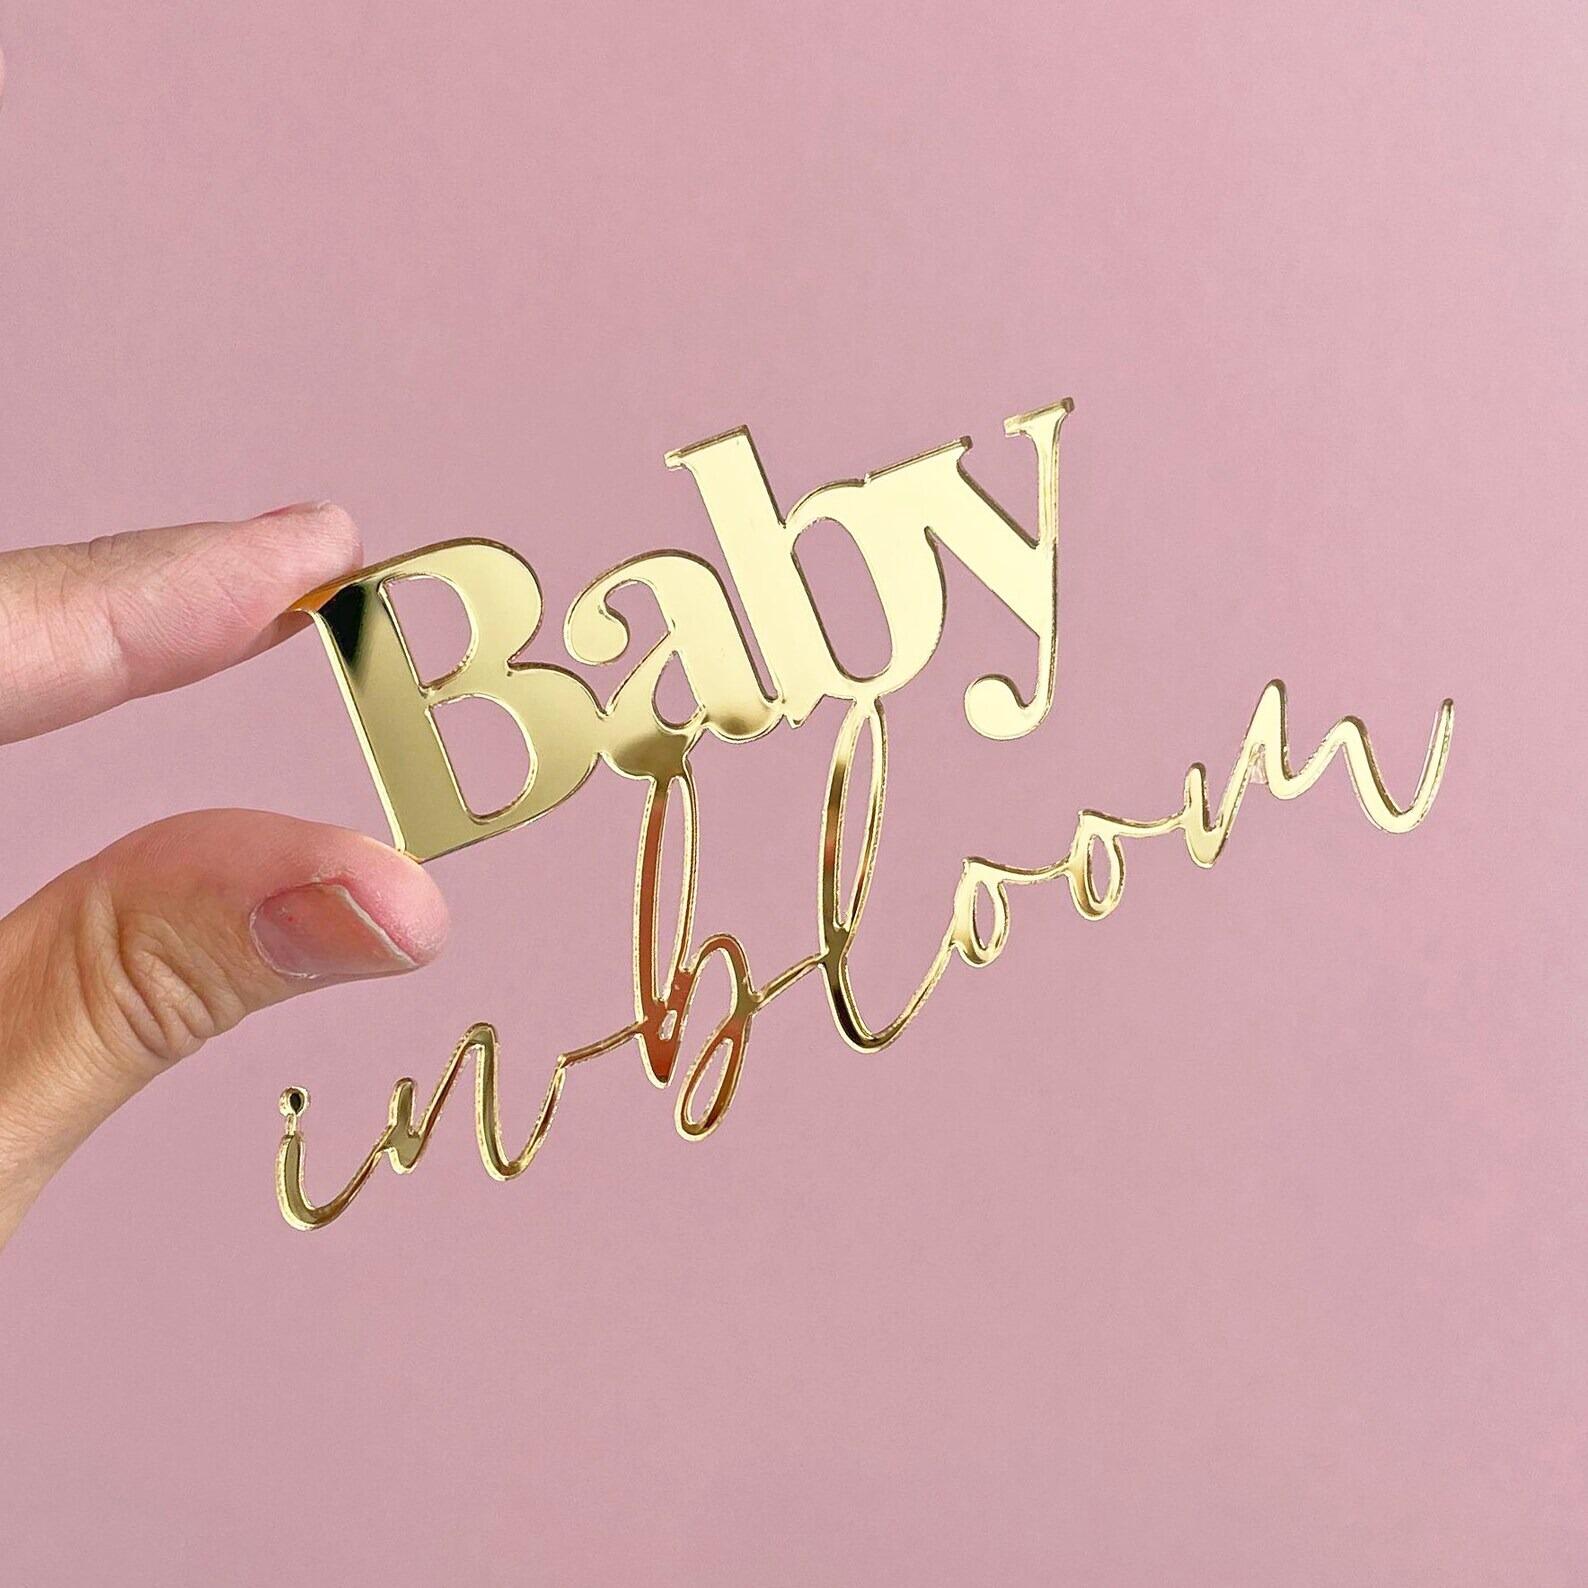 Baby in Bloom Cake Charm - Cake charm